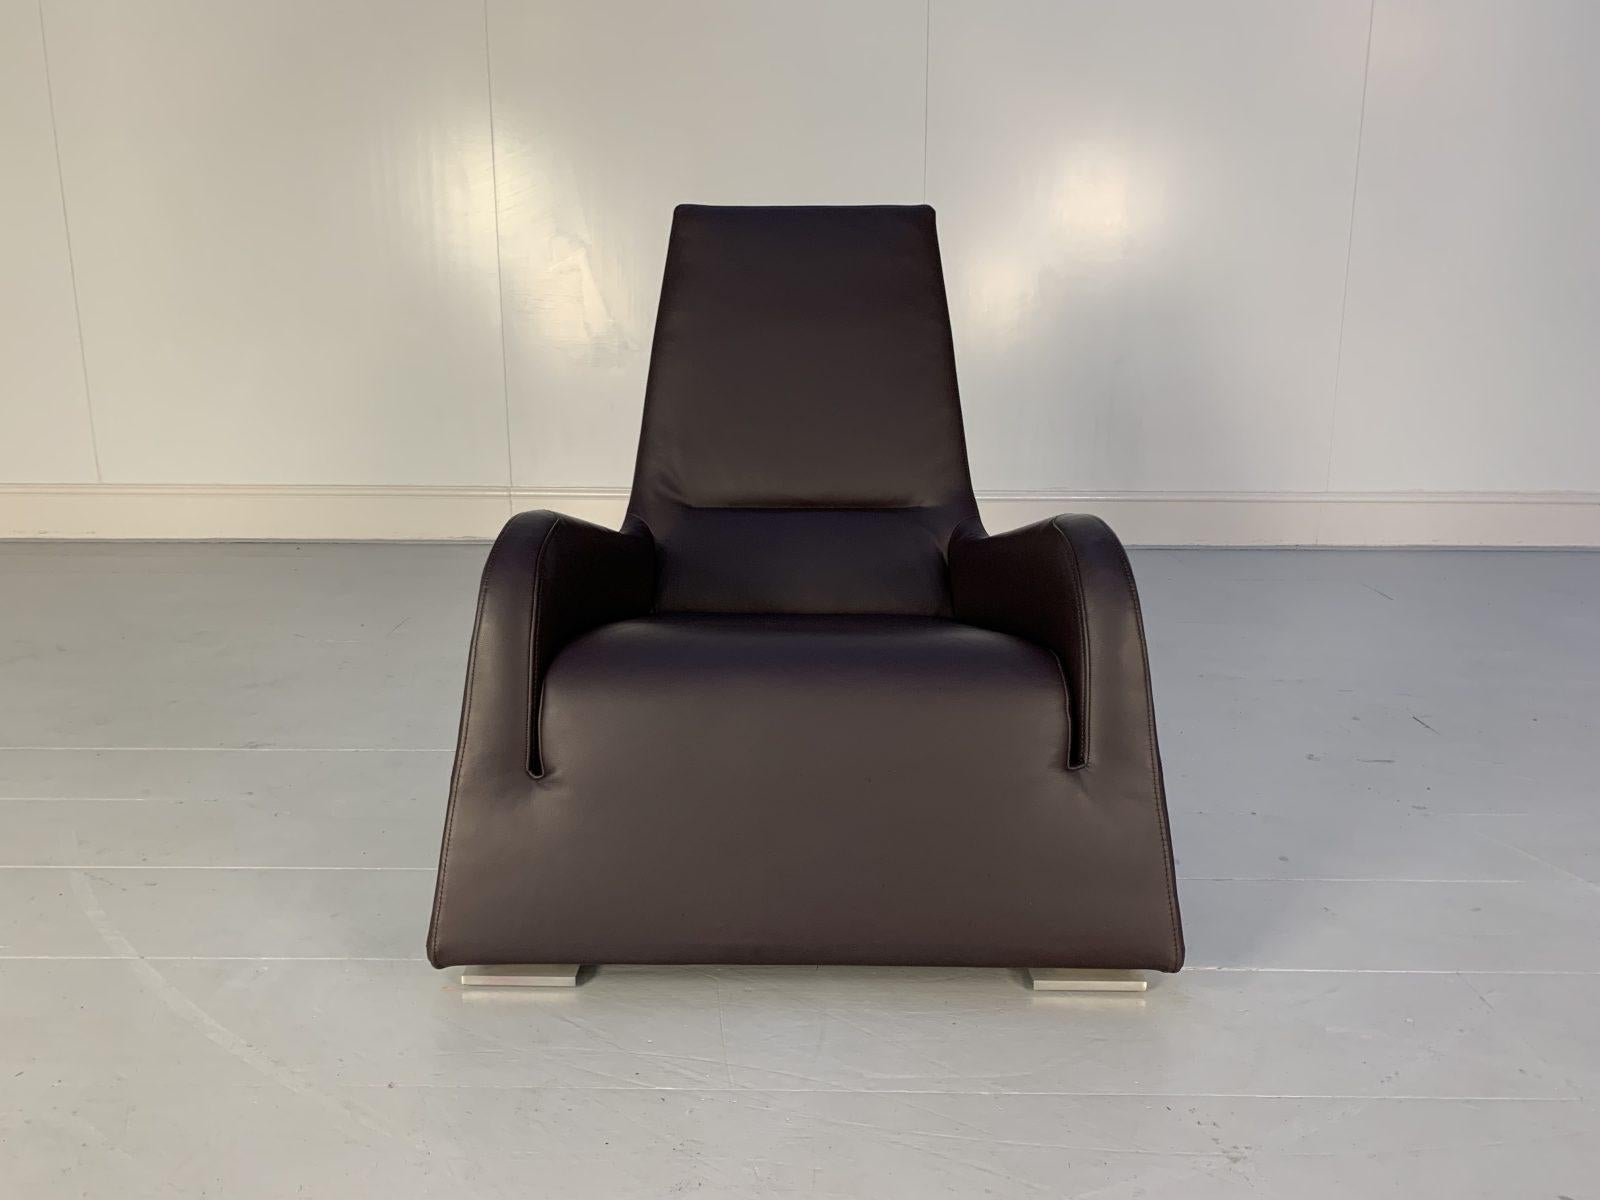 On offer on this occasion is a superb Ligne Roset “Jul” Large Armchair, dressed in a peerless top-grade aubergine-purple leather.

As you will no doubt be aware by your interest in this Alban Gilles masterpiece, Ligne Roset pieces are the epitome